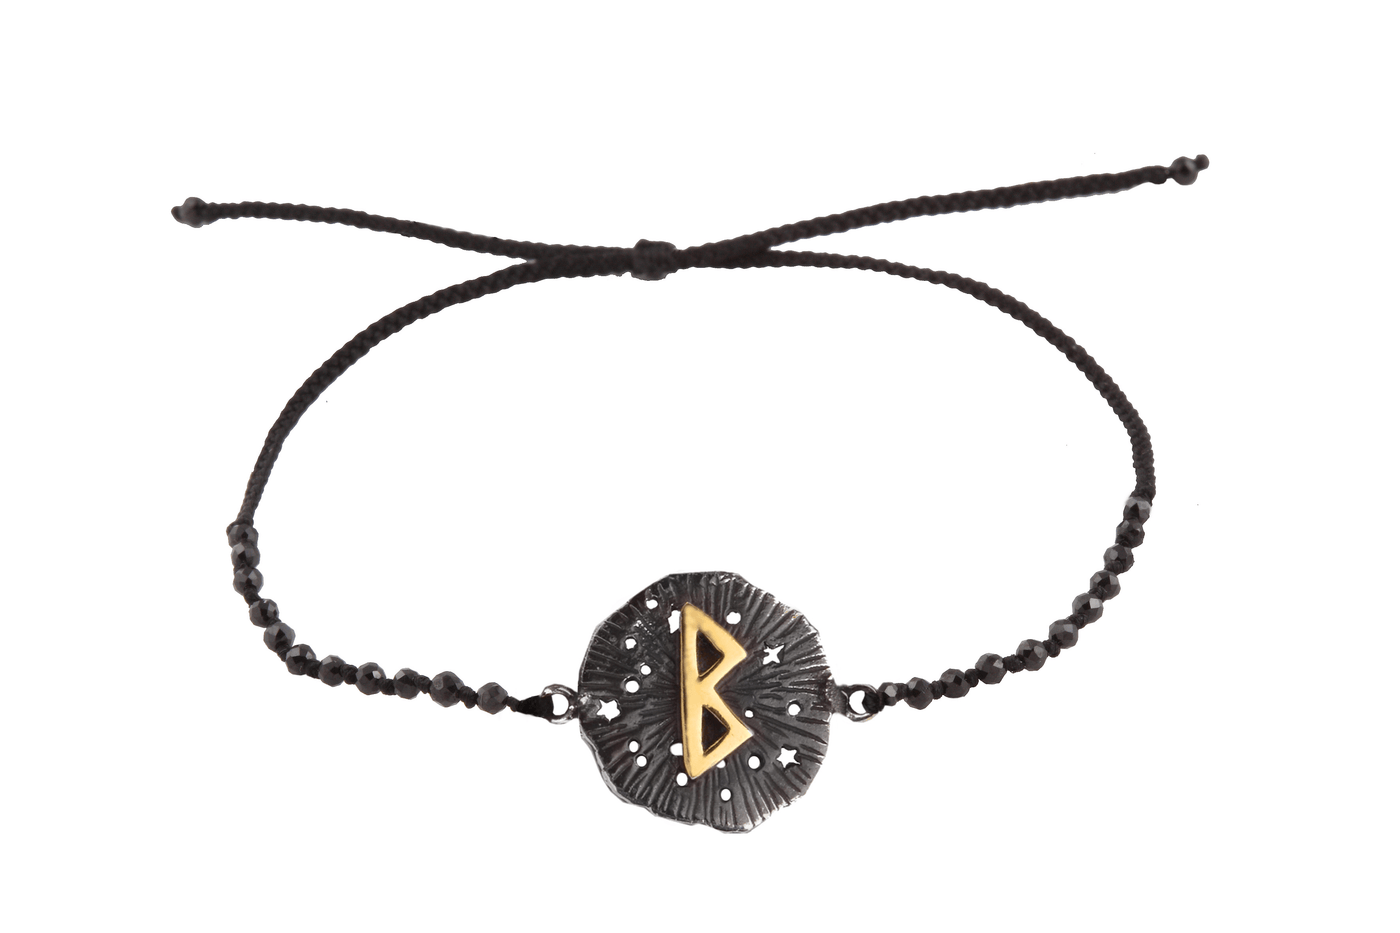 Runic medallion amulet Berkana bracelet with beads. Gold plated and oxide